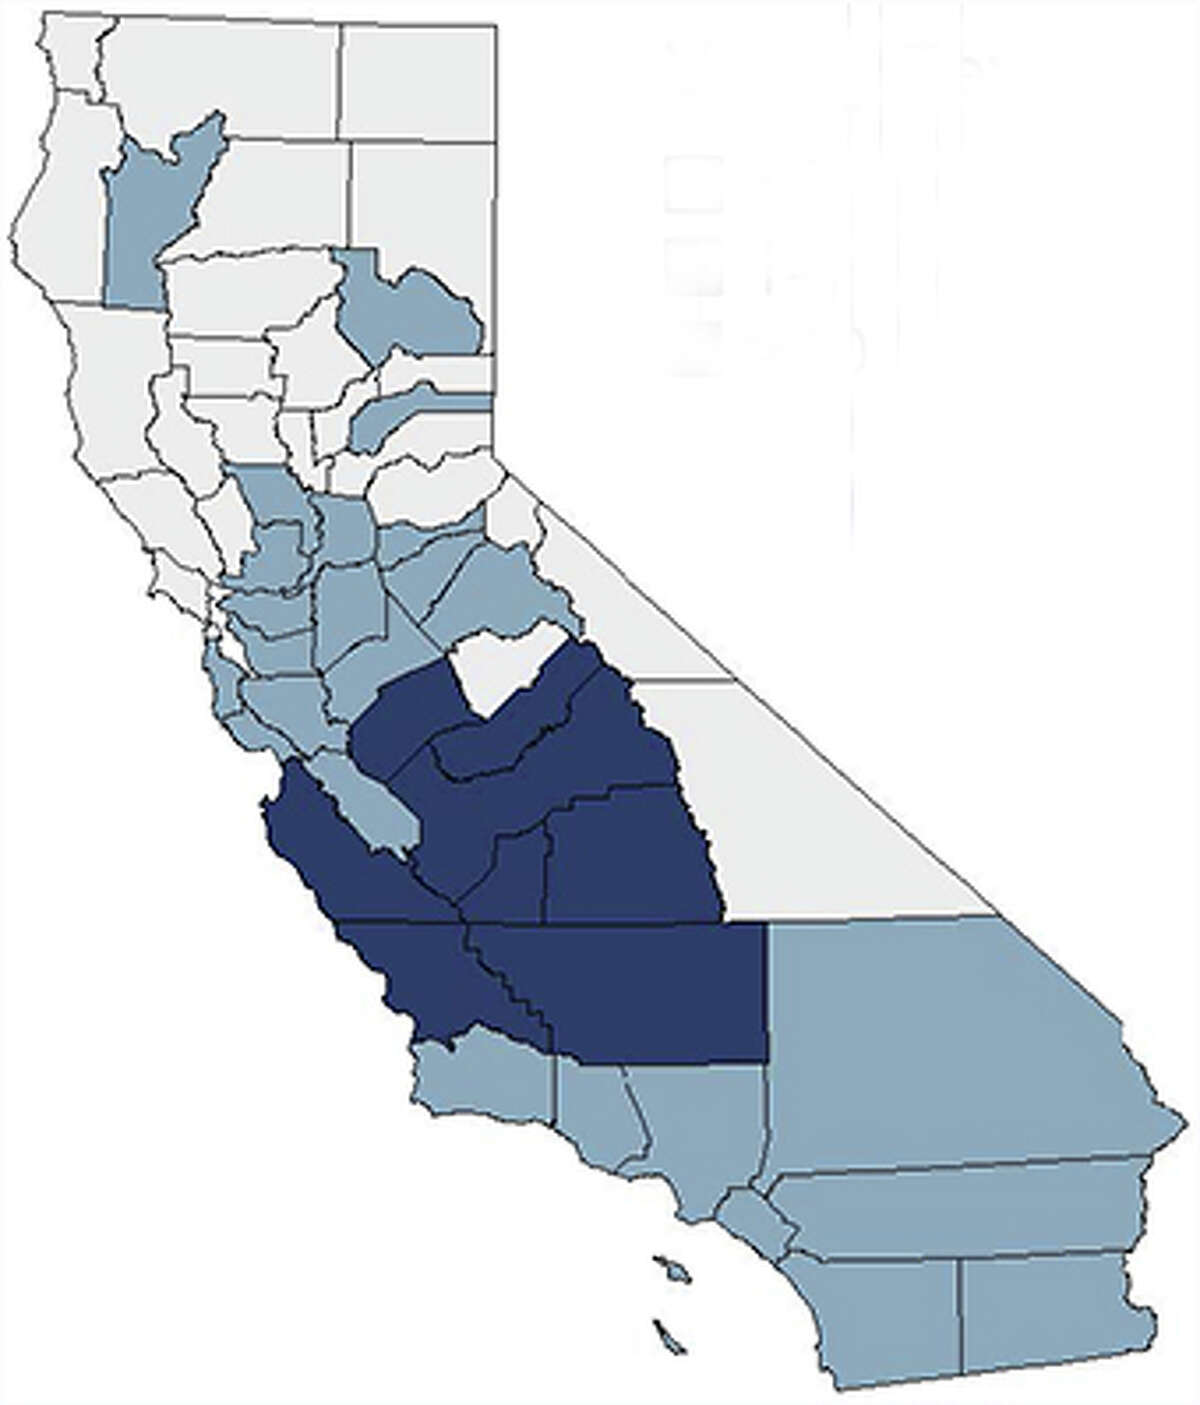 Valley Fever cases in California continue to increase